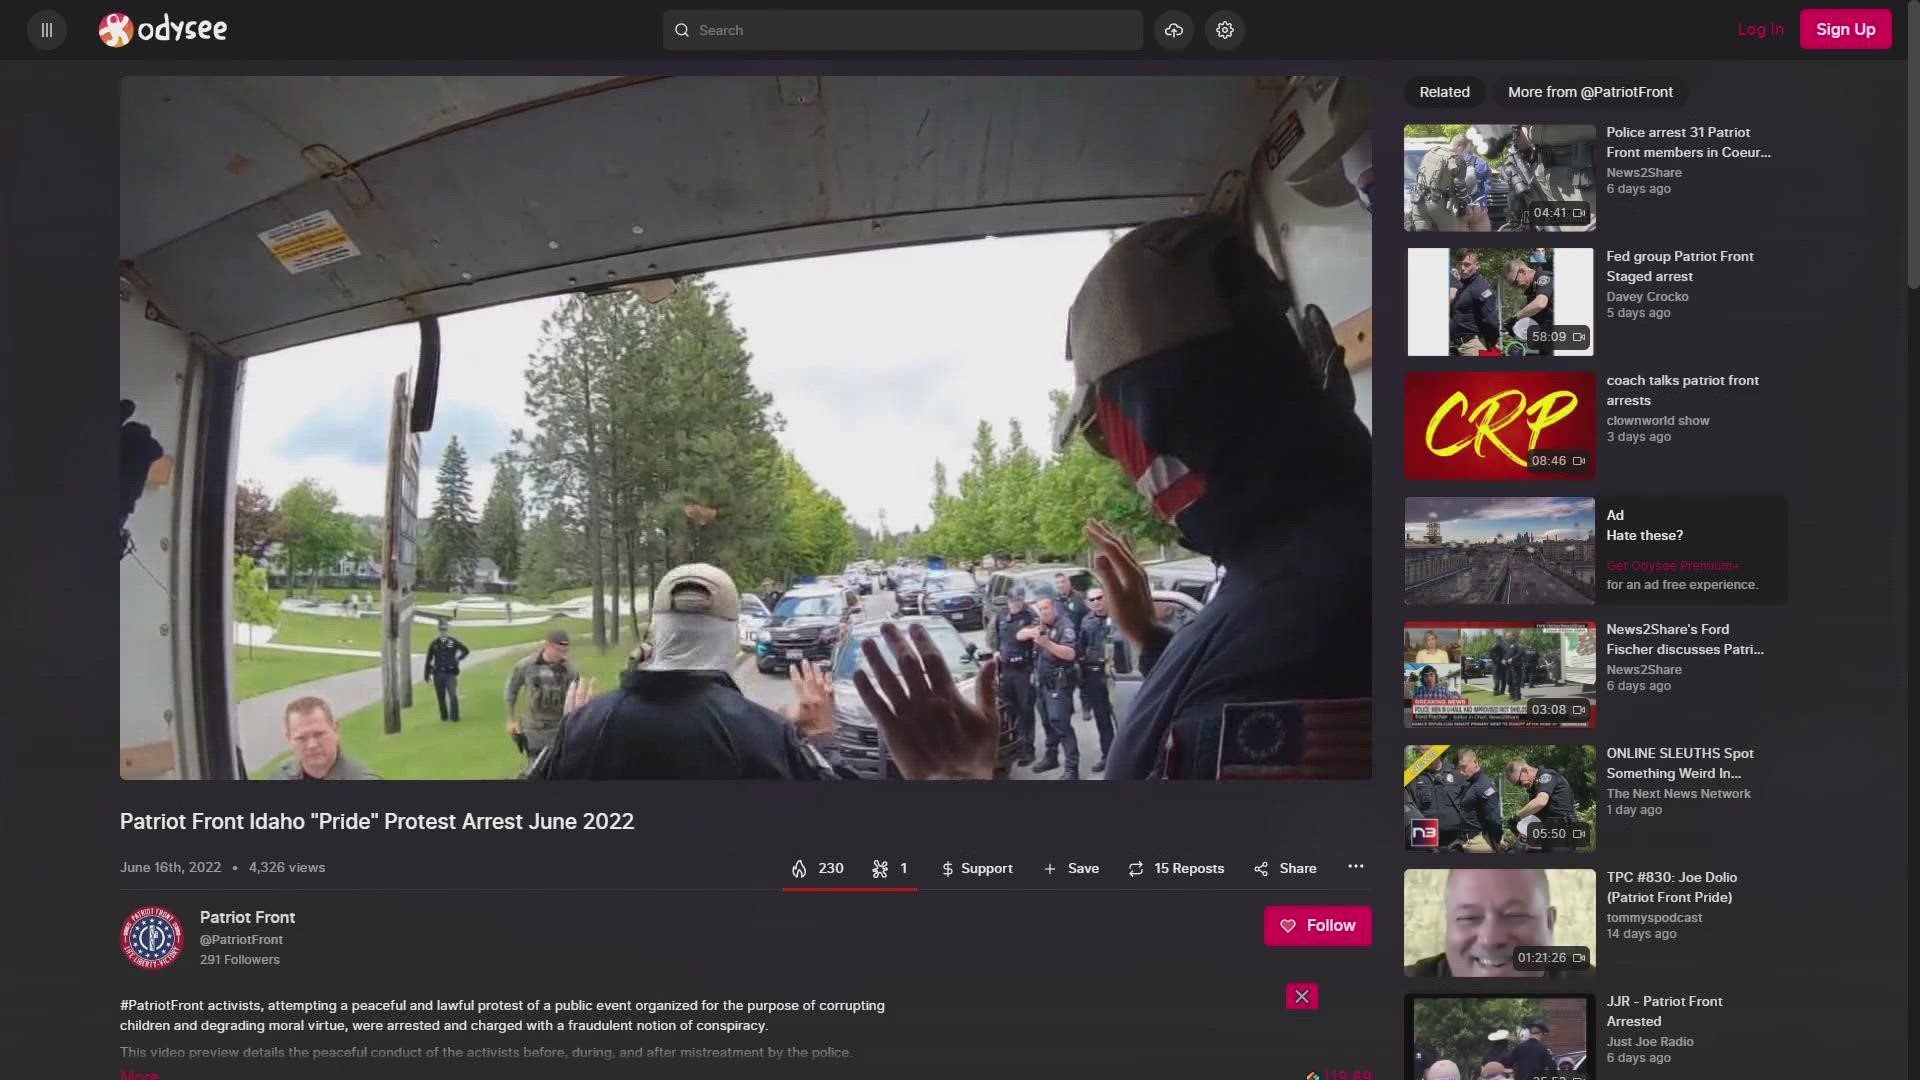 A new, highly edited, video shows a hate group inside U-haul before they were arrested near a Coeur d'Alene Pride event.